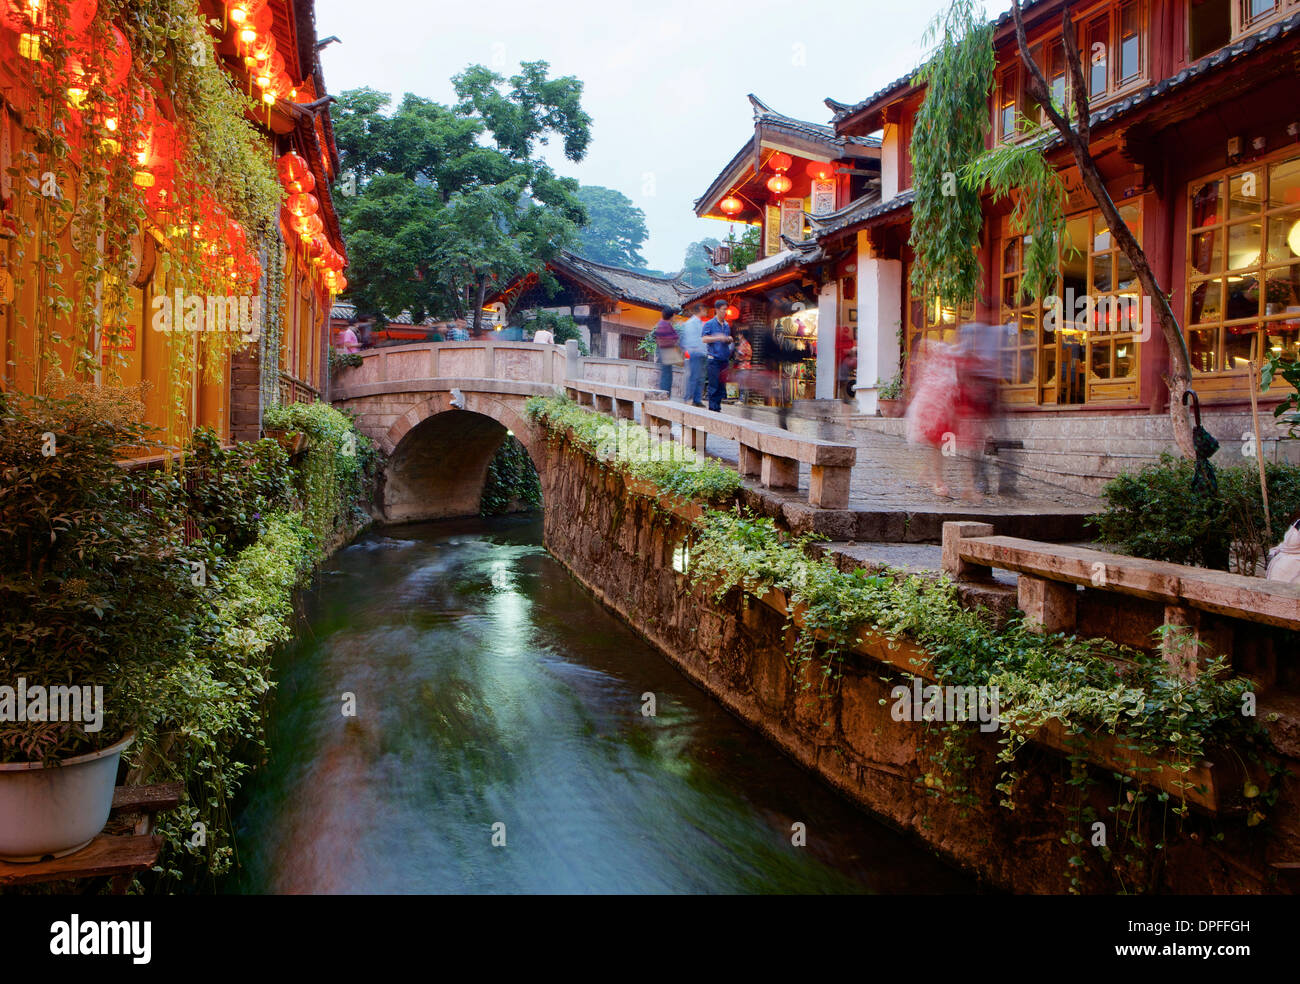 Early evening street scene in the Old Town, Lijiang, UNESCO World Heritage Site, Yunnan Province, China, Asia Stock Photo